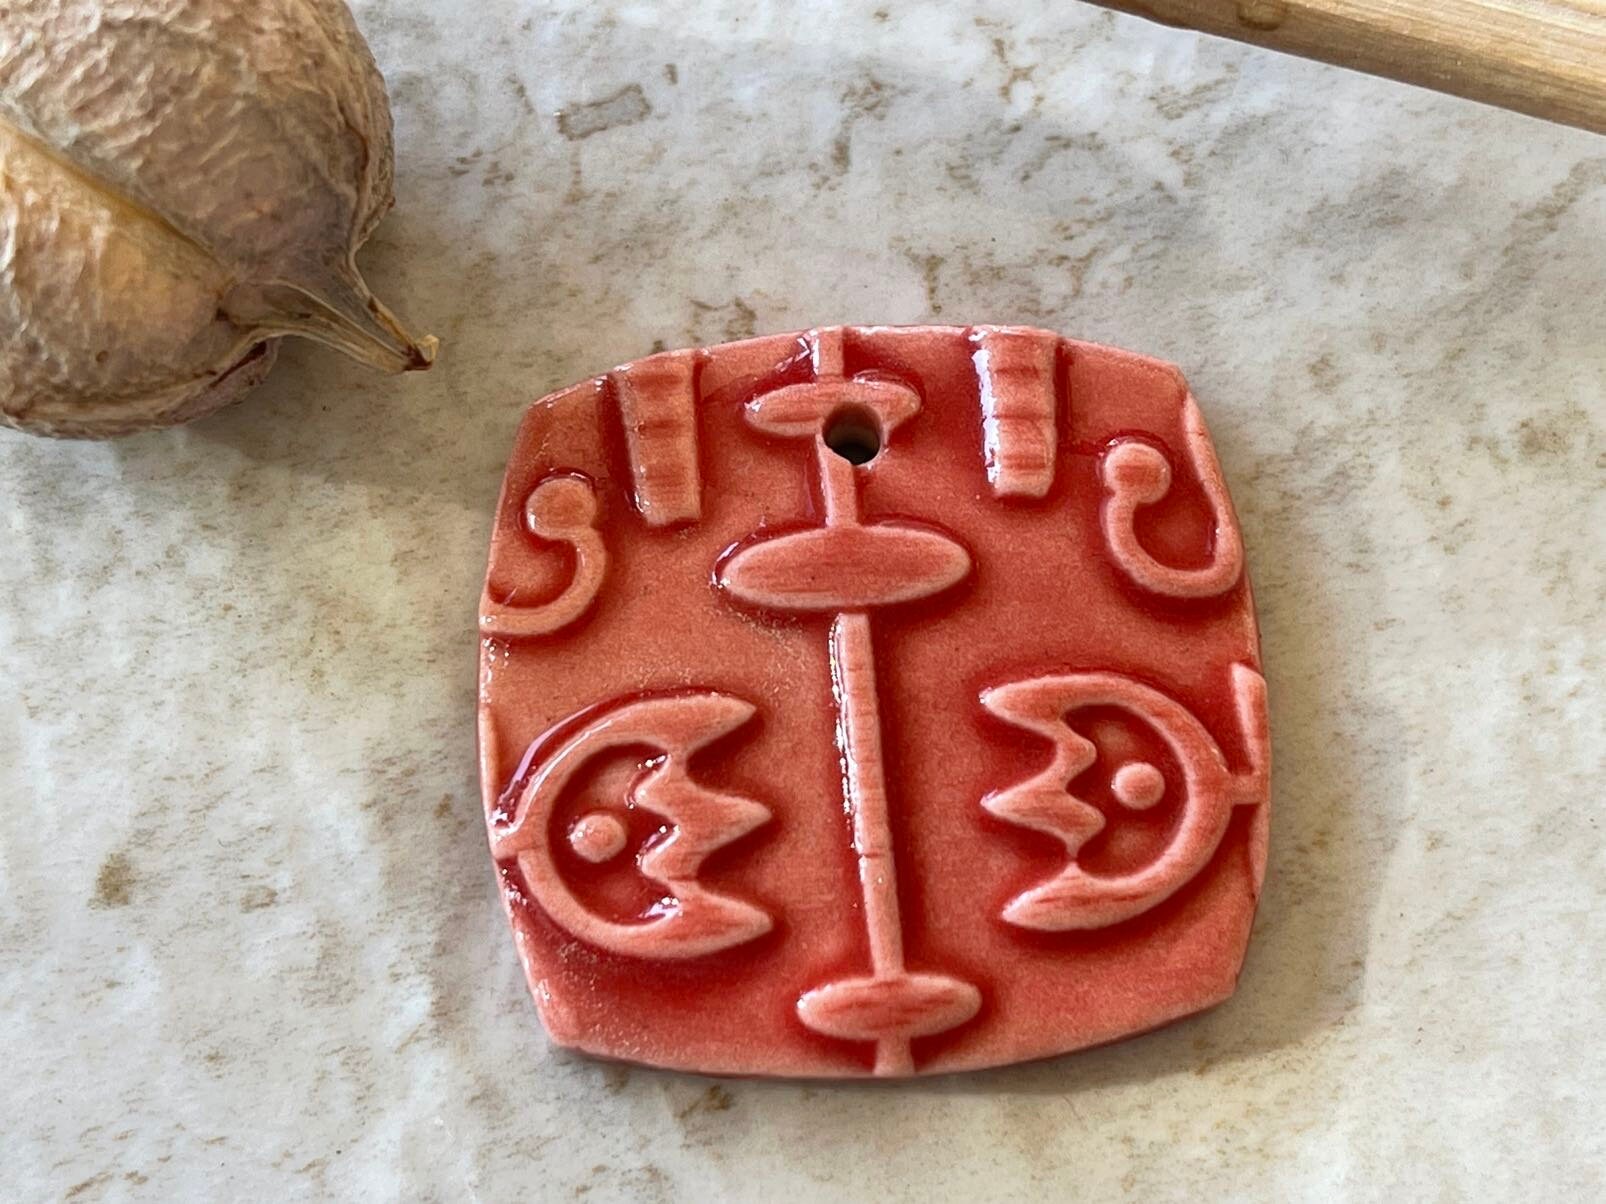 Abstract Pendant, Red Pendant, Folk Art, Porcelain Ceramic Pendant, Jewelry Making Components